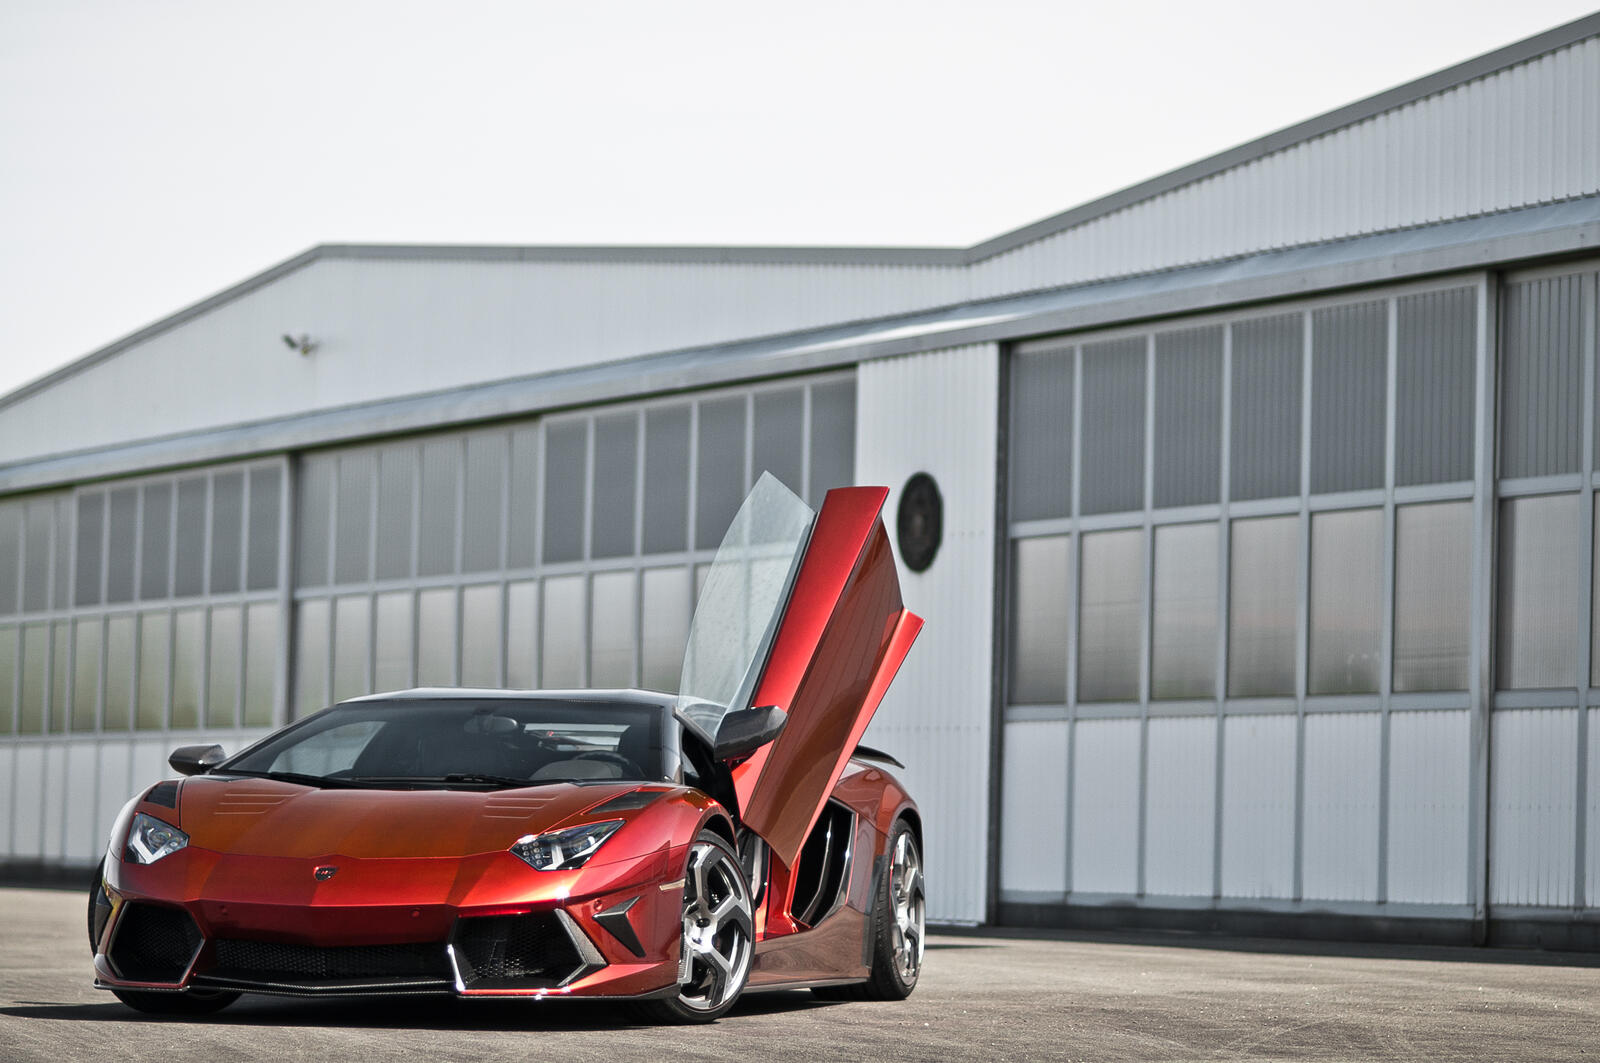 Free photo A red Lamborghini Aventador stands outside the large aircraft hangars with the door open